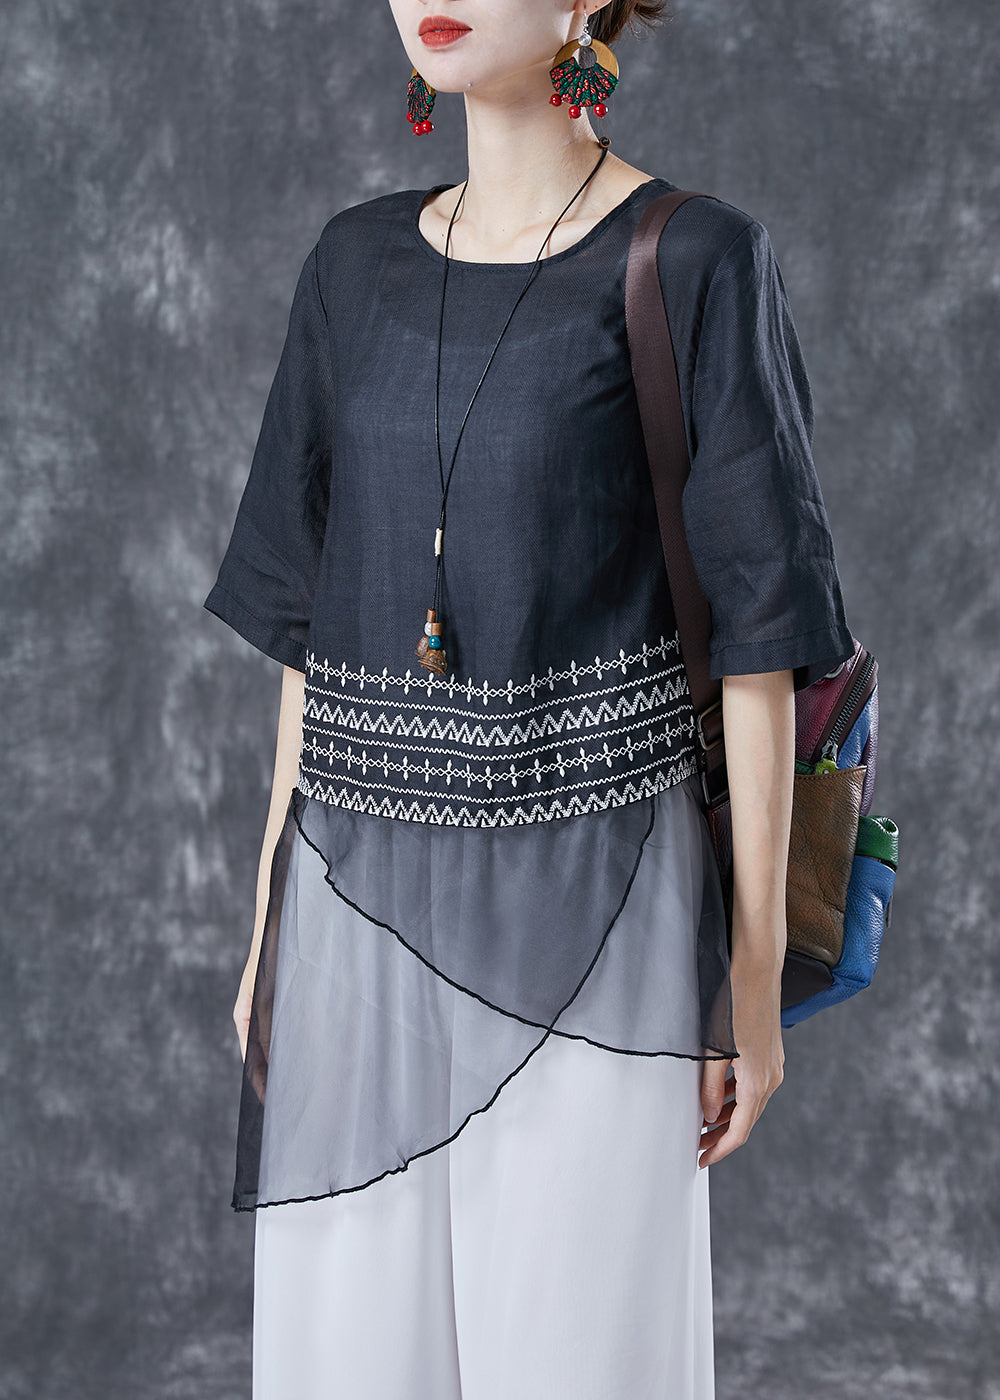 Elegant Black Embroideried Tulle Patchwork Linen Top Summer LY4078 - fabuloryshop